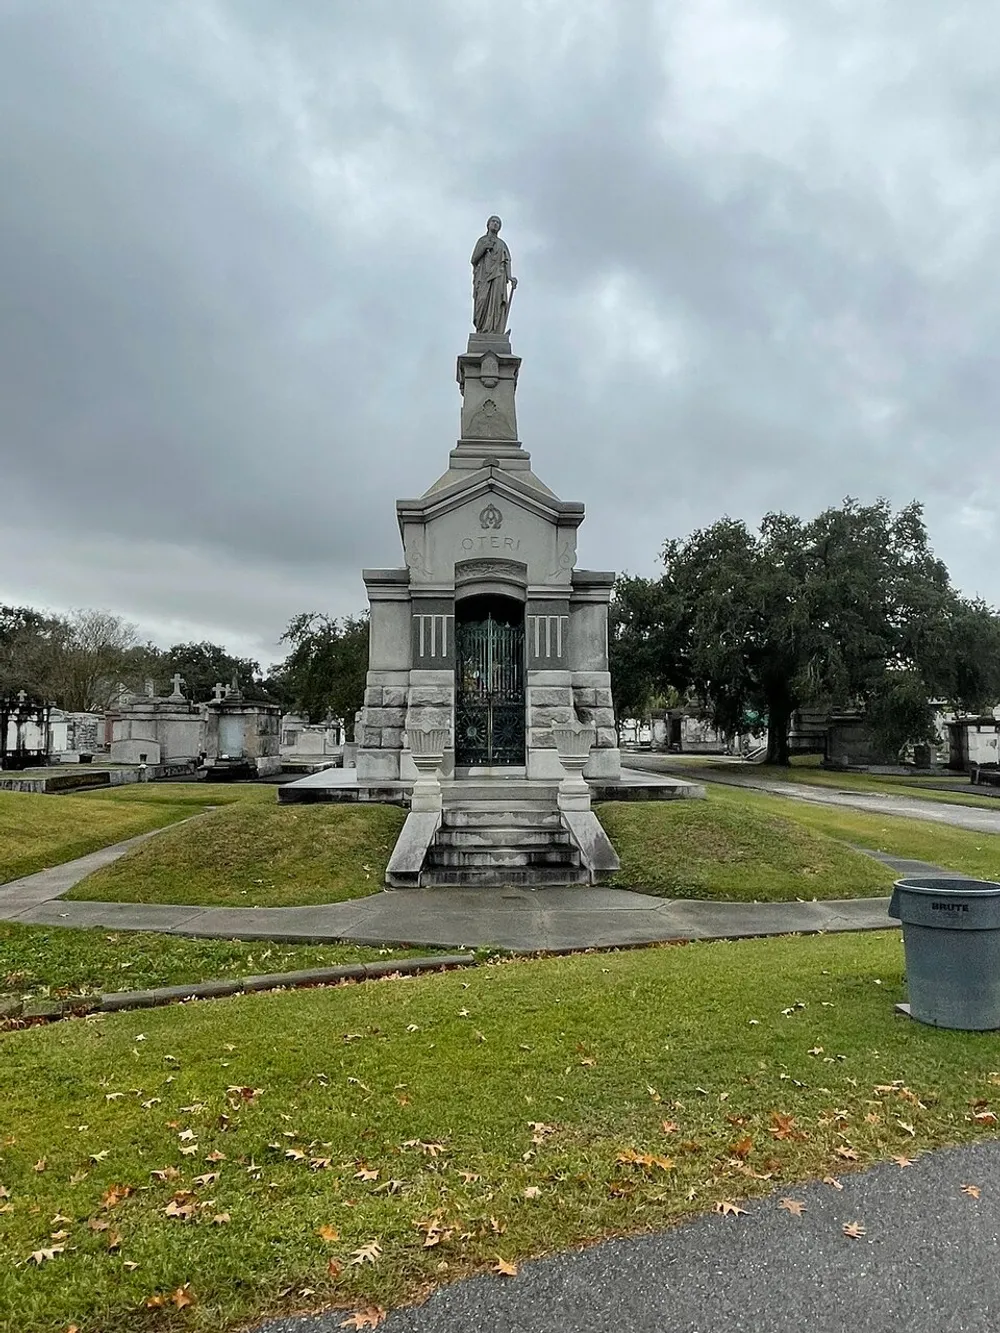 The image depicts an ornate mausoleum with a statue on top under an overcast sky surrounded by a well-maintained lawn dotted with fallen leaves